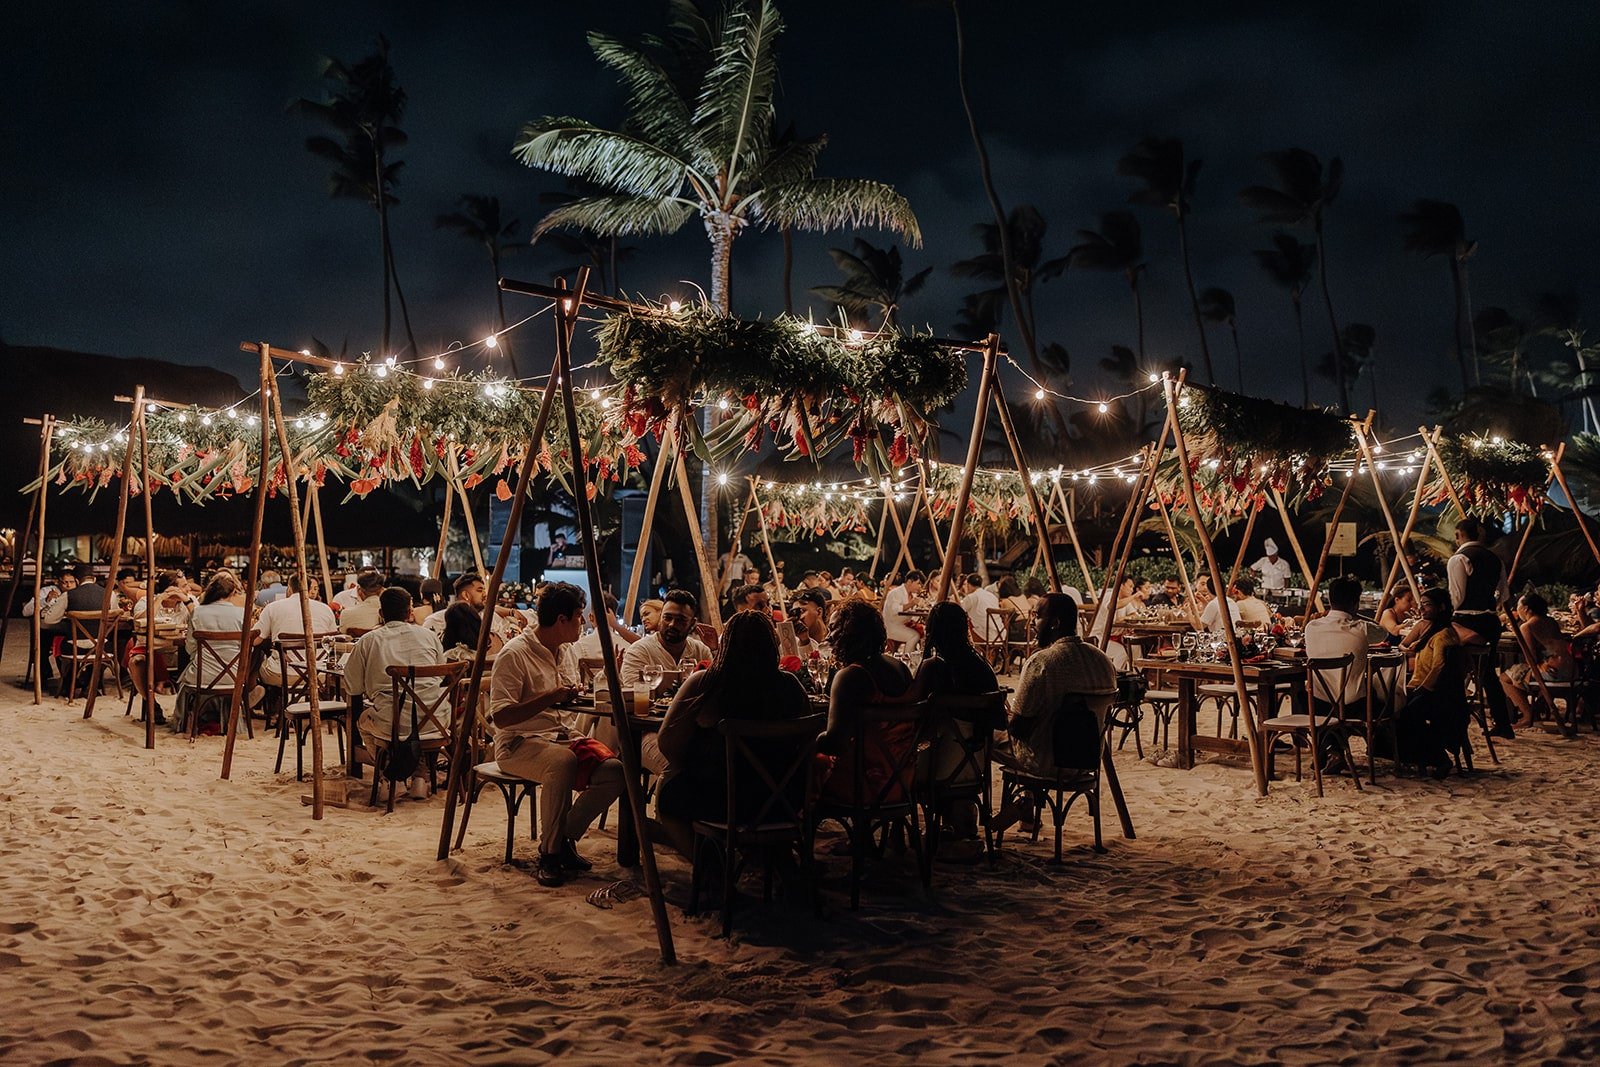 Guests sit under string lights on the beach during the Dreams Royal Beach Punta Cana wedding reception